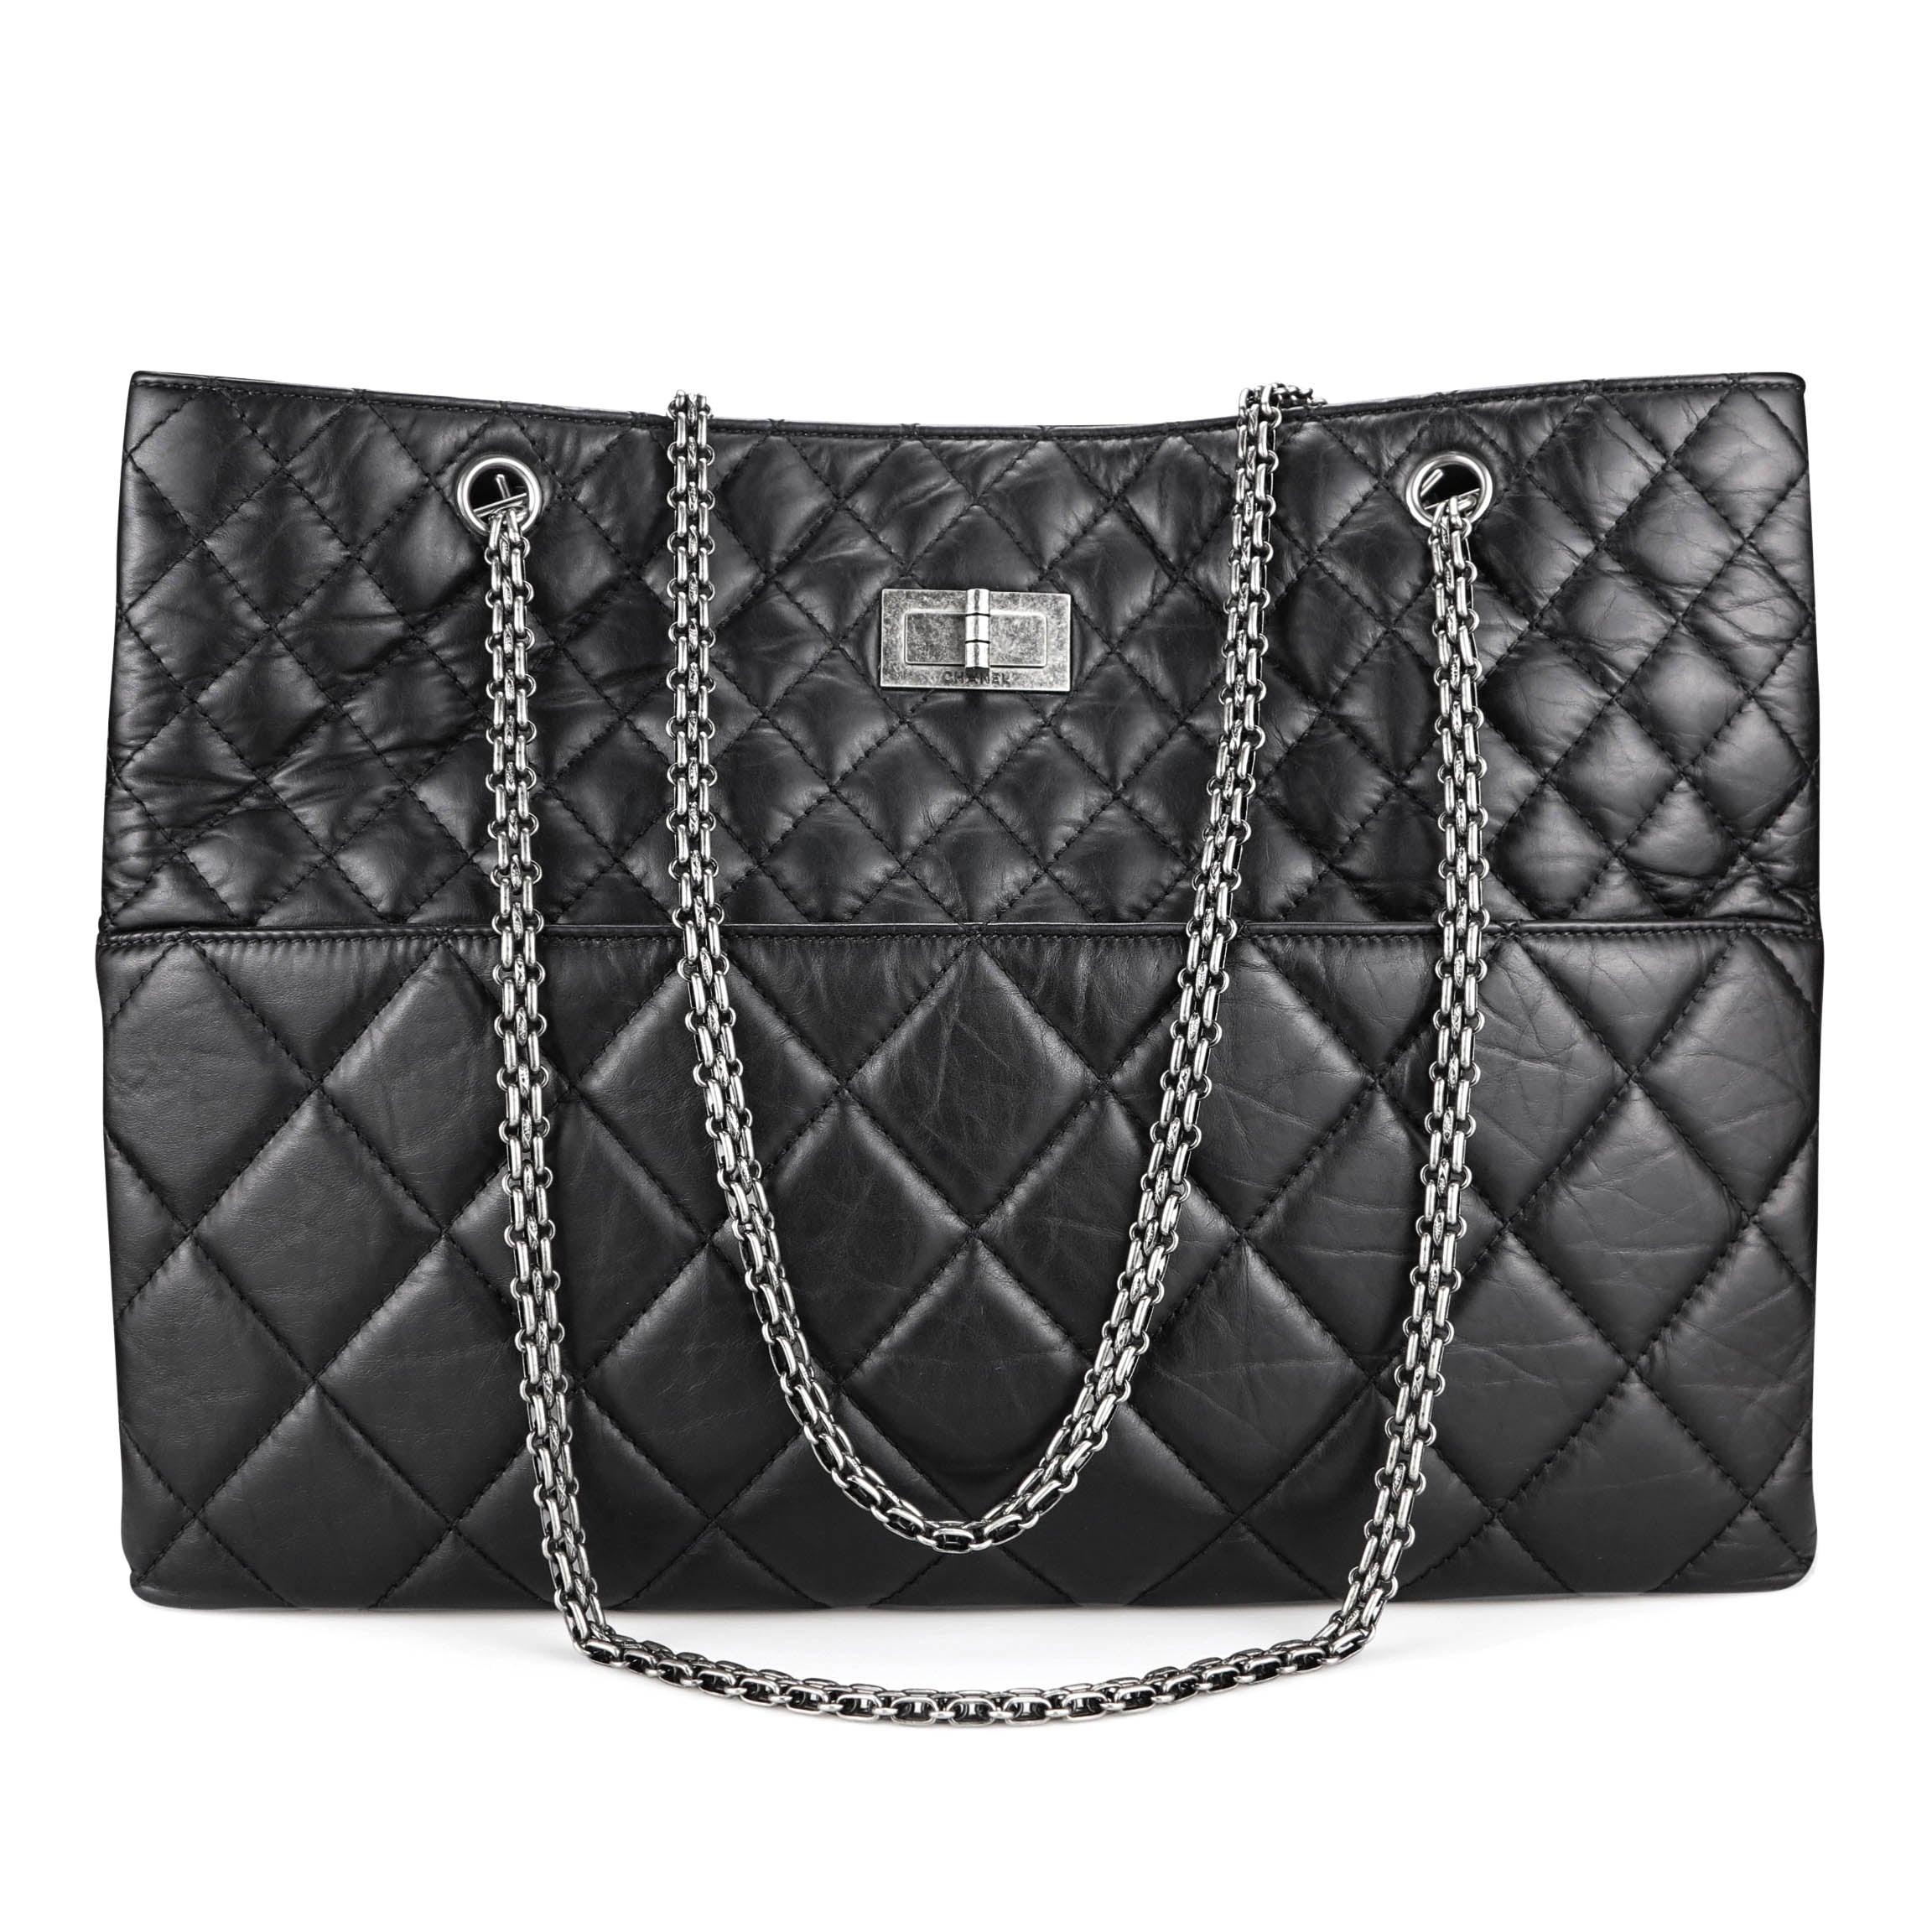 2.55 leather tote Chanel Black in Leather - 37238588